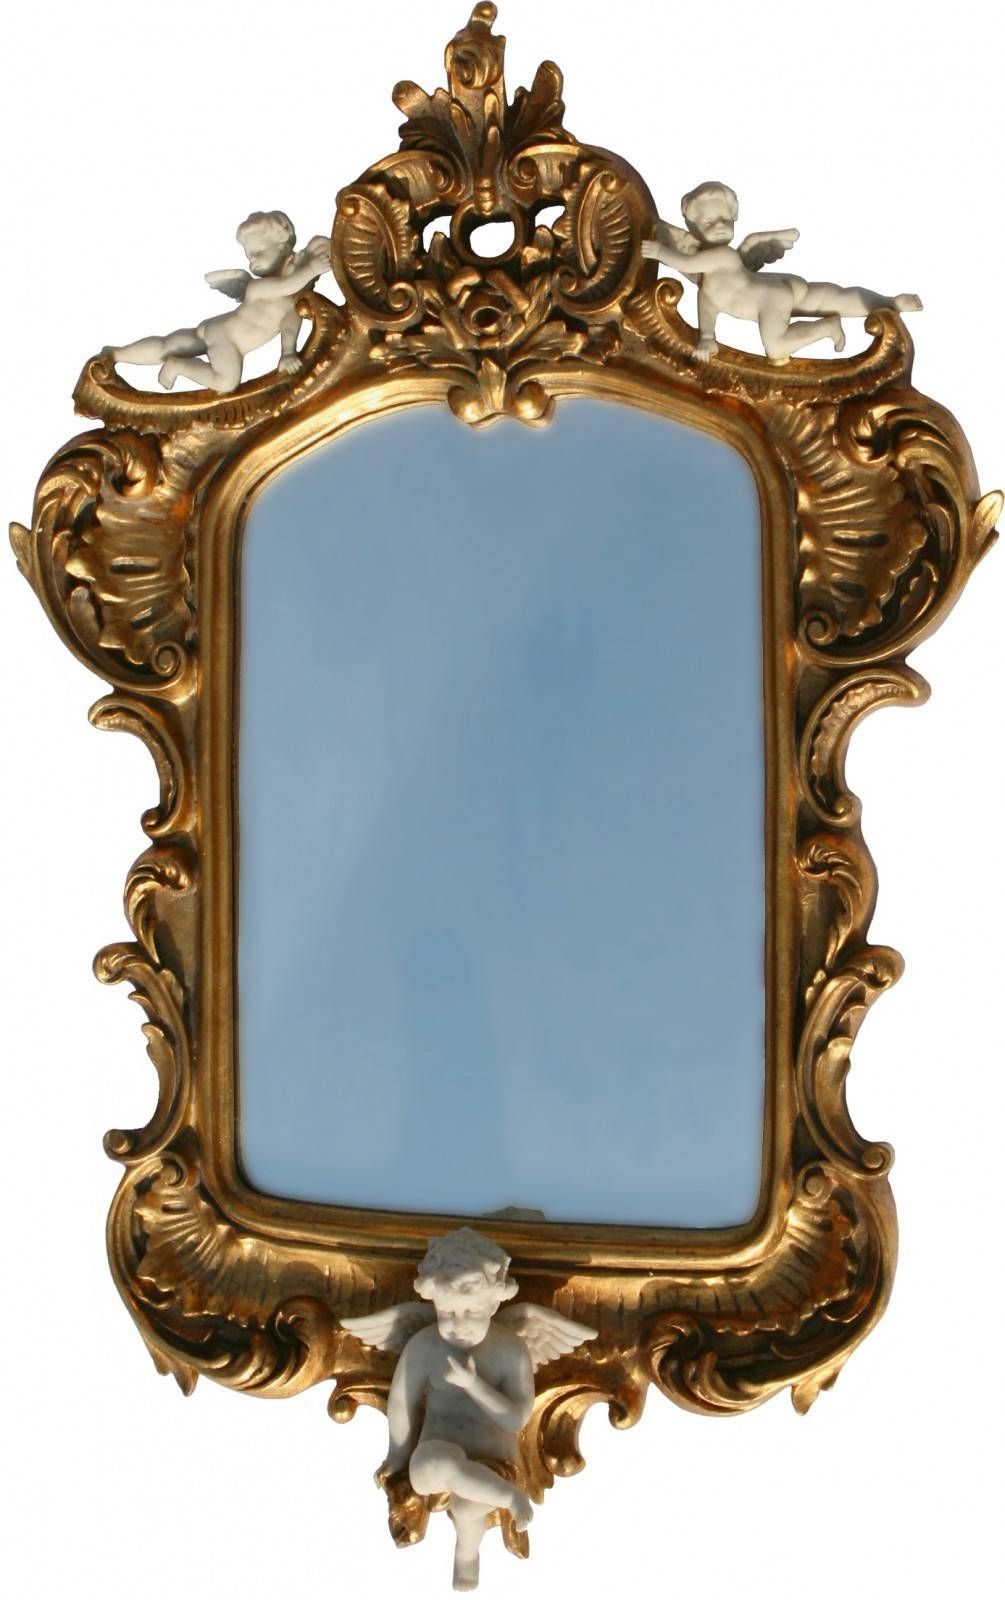 Angel Motif Baroque Mirror In Gold Wooden Frame With Three White Intended For Gold Baroque Mirrors (View 4 of 15)